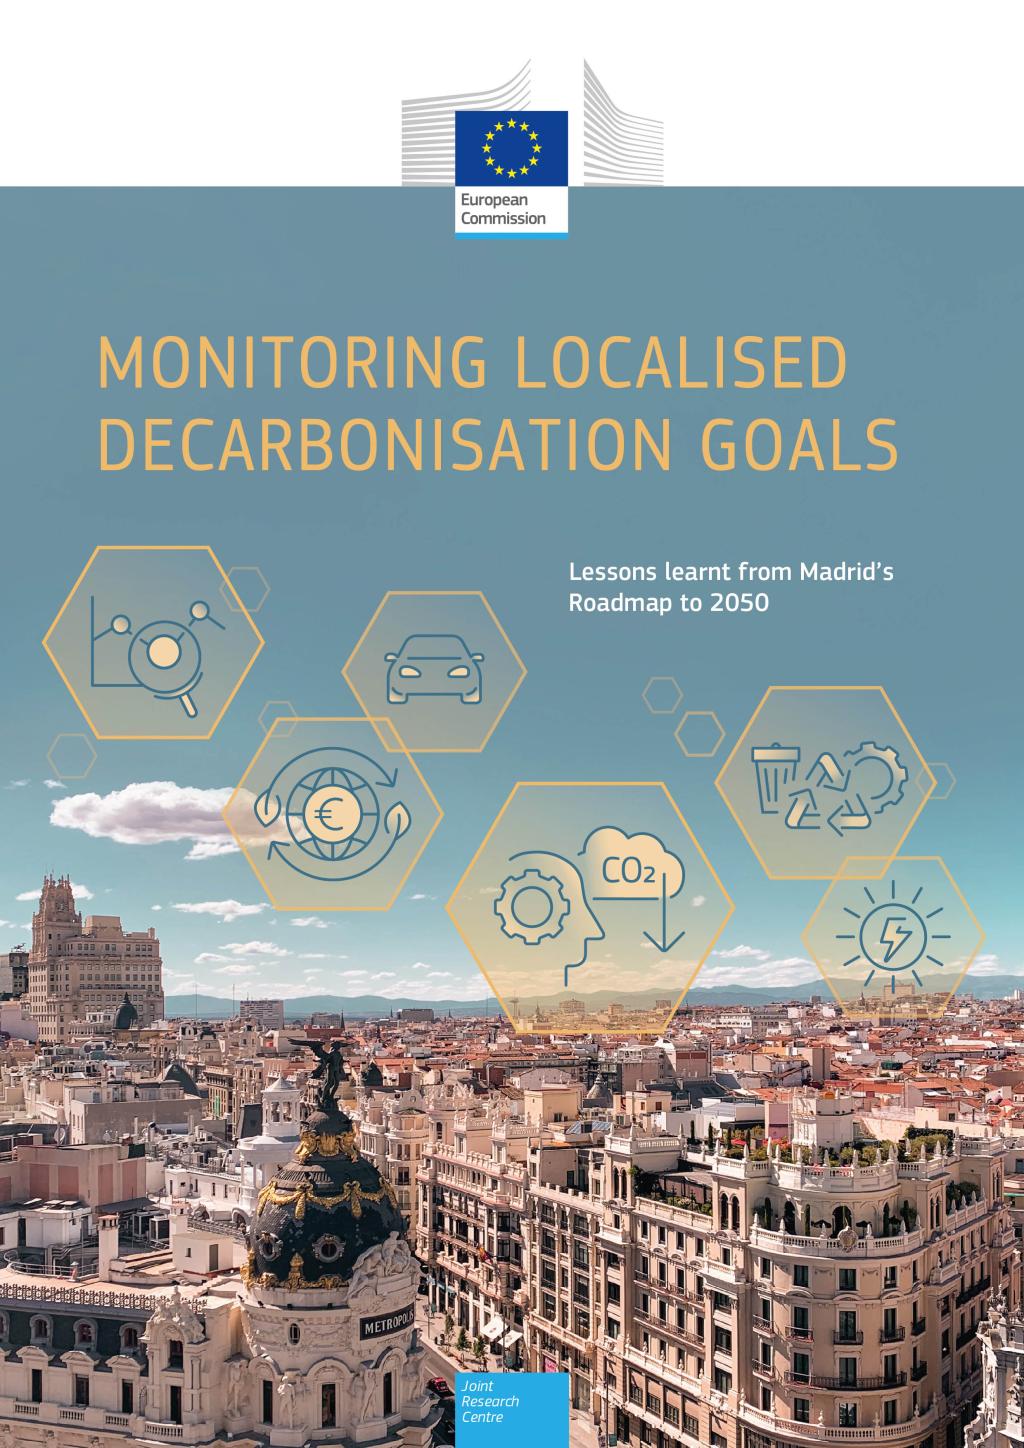 Monitoring localised decarbonisation goals: lessons learnt from Madrid’s Roadmap to 2050